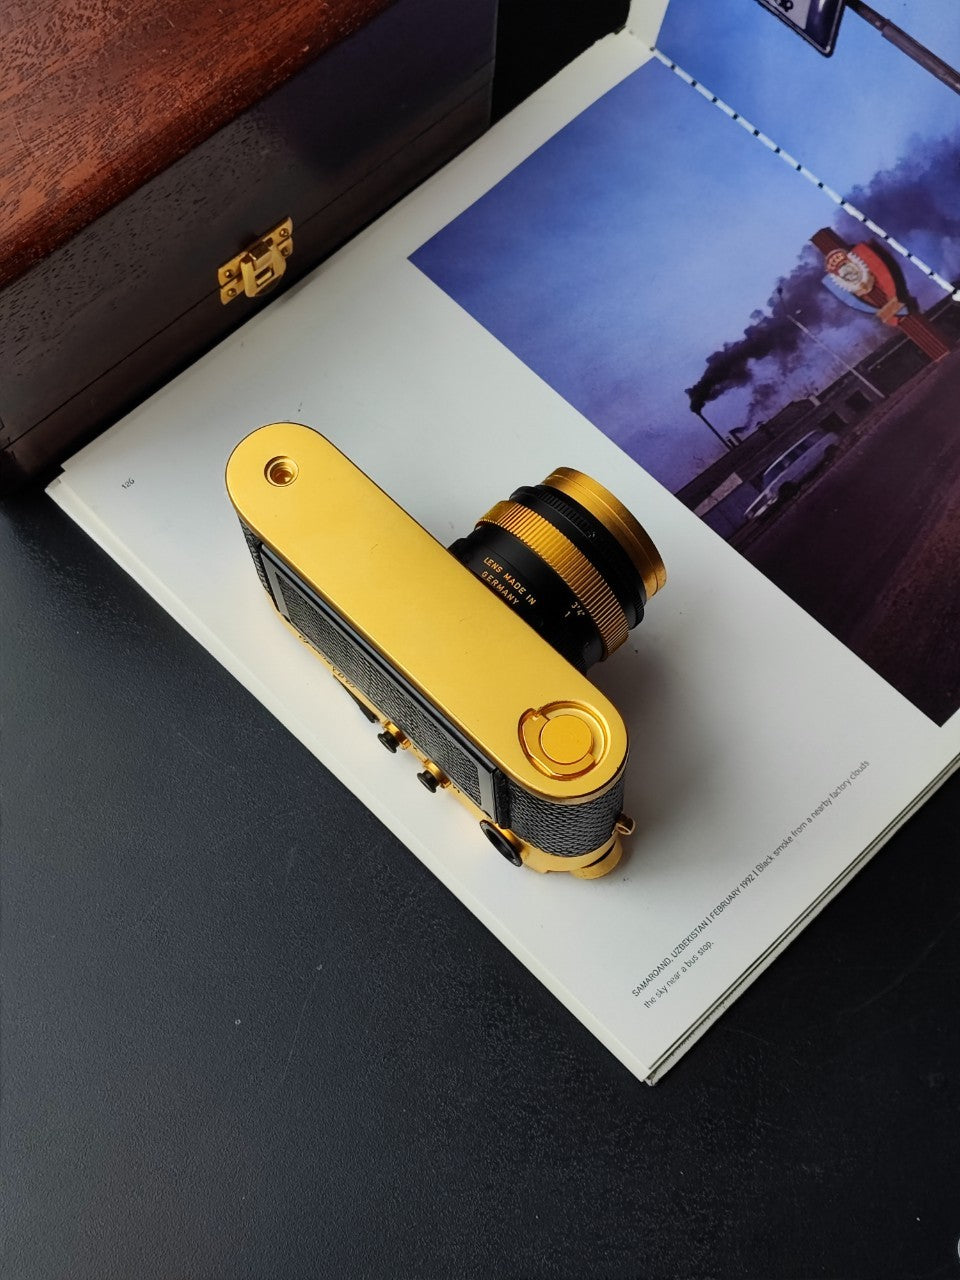 Leica M4-2 Gold limited with lens